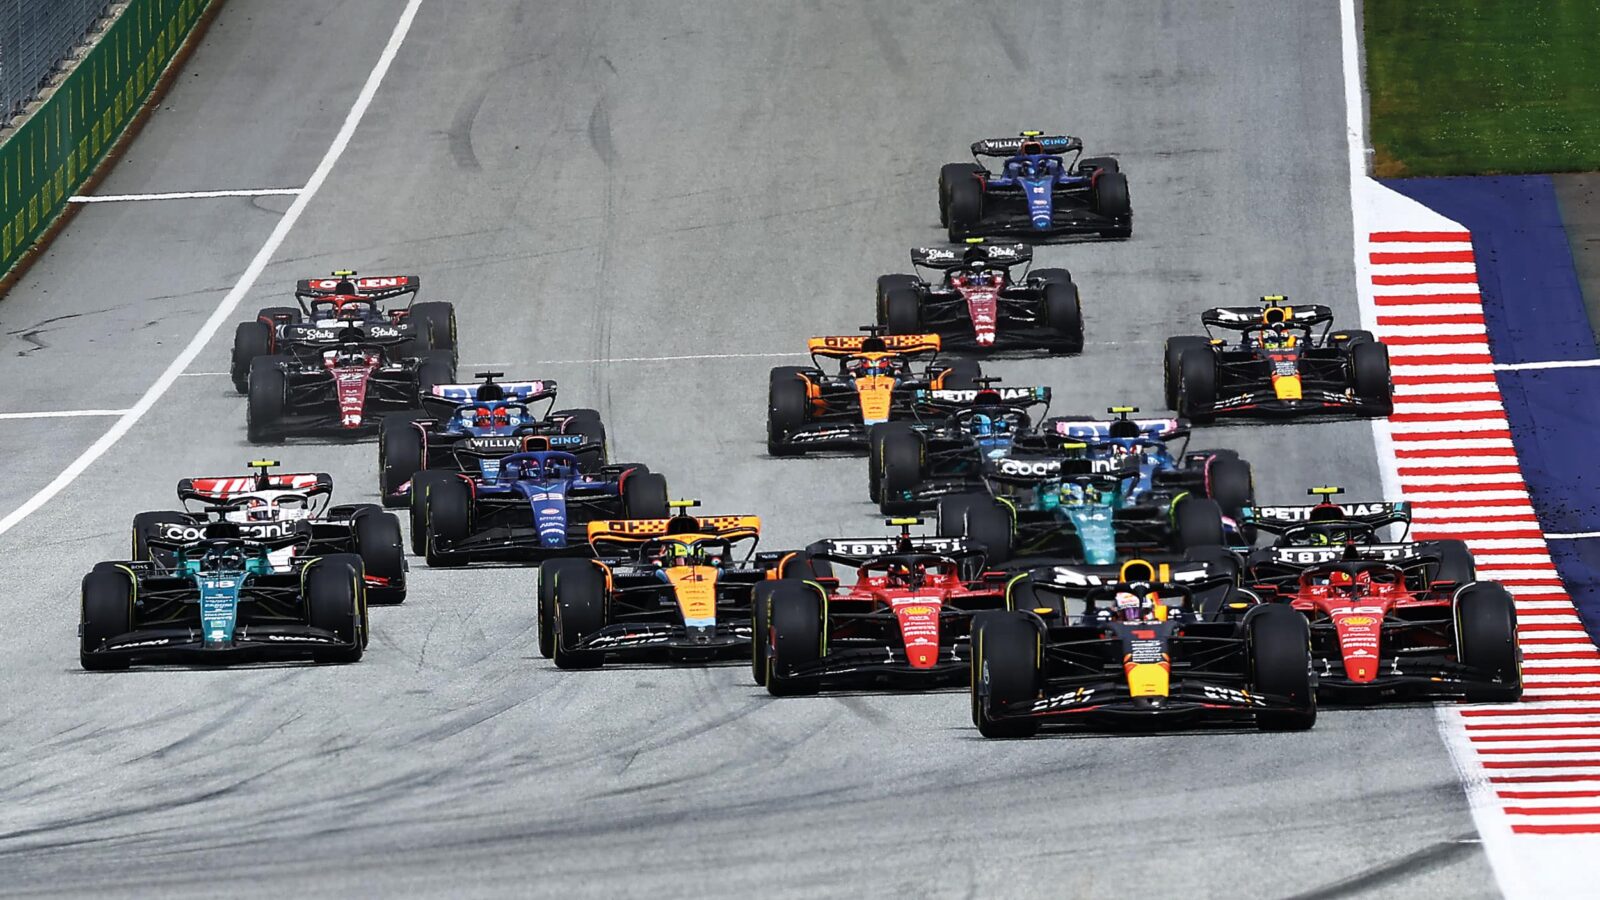 Max Verstappen leads at the Red Bull Ring